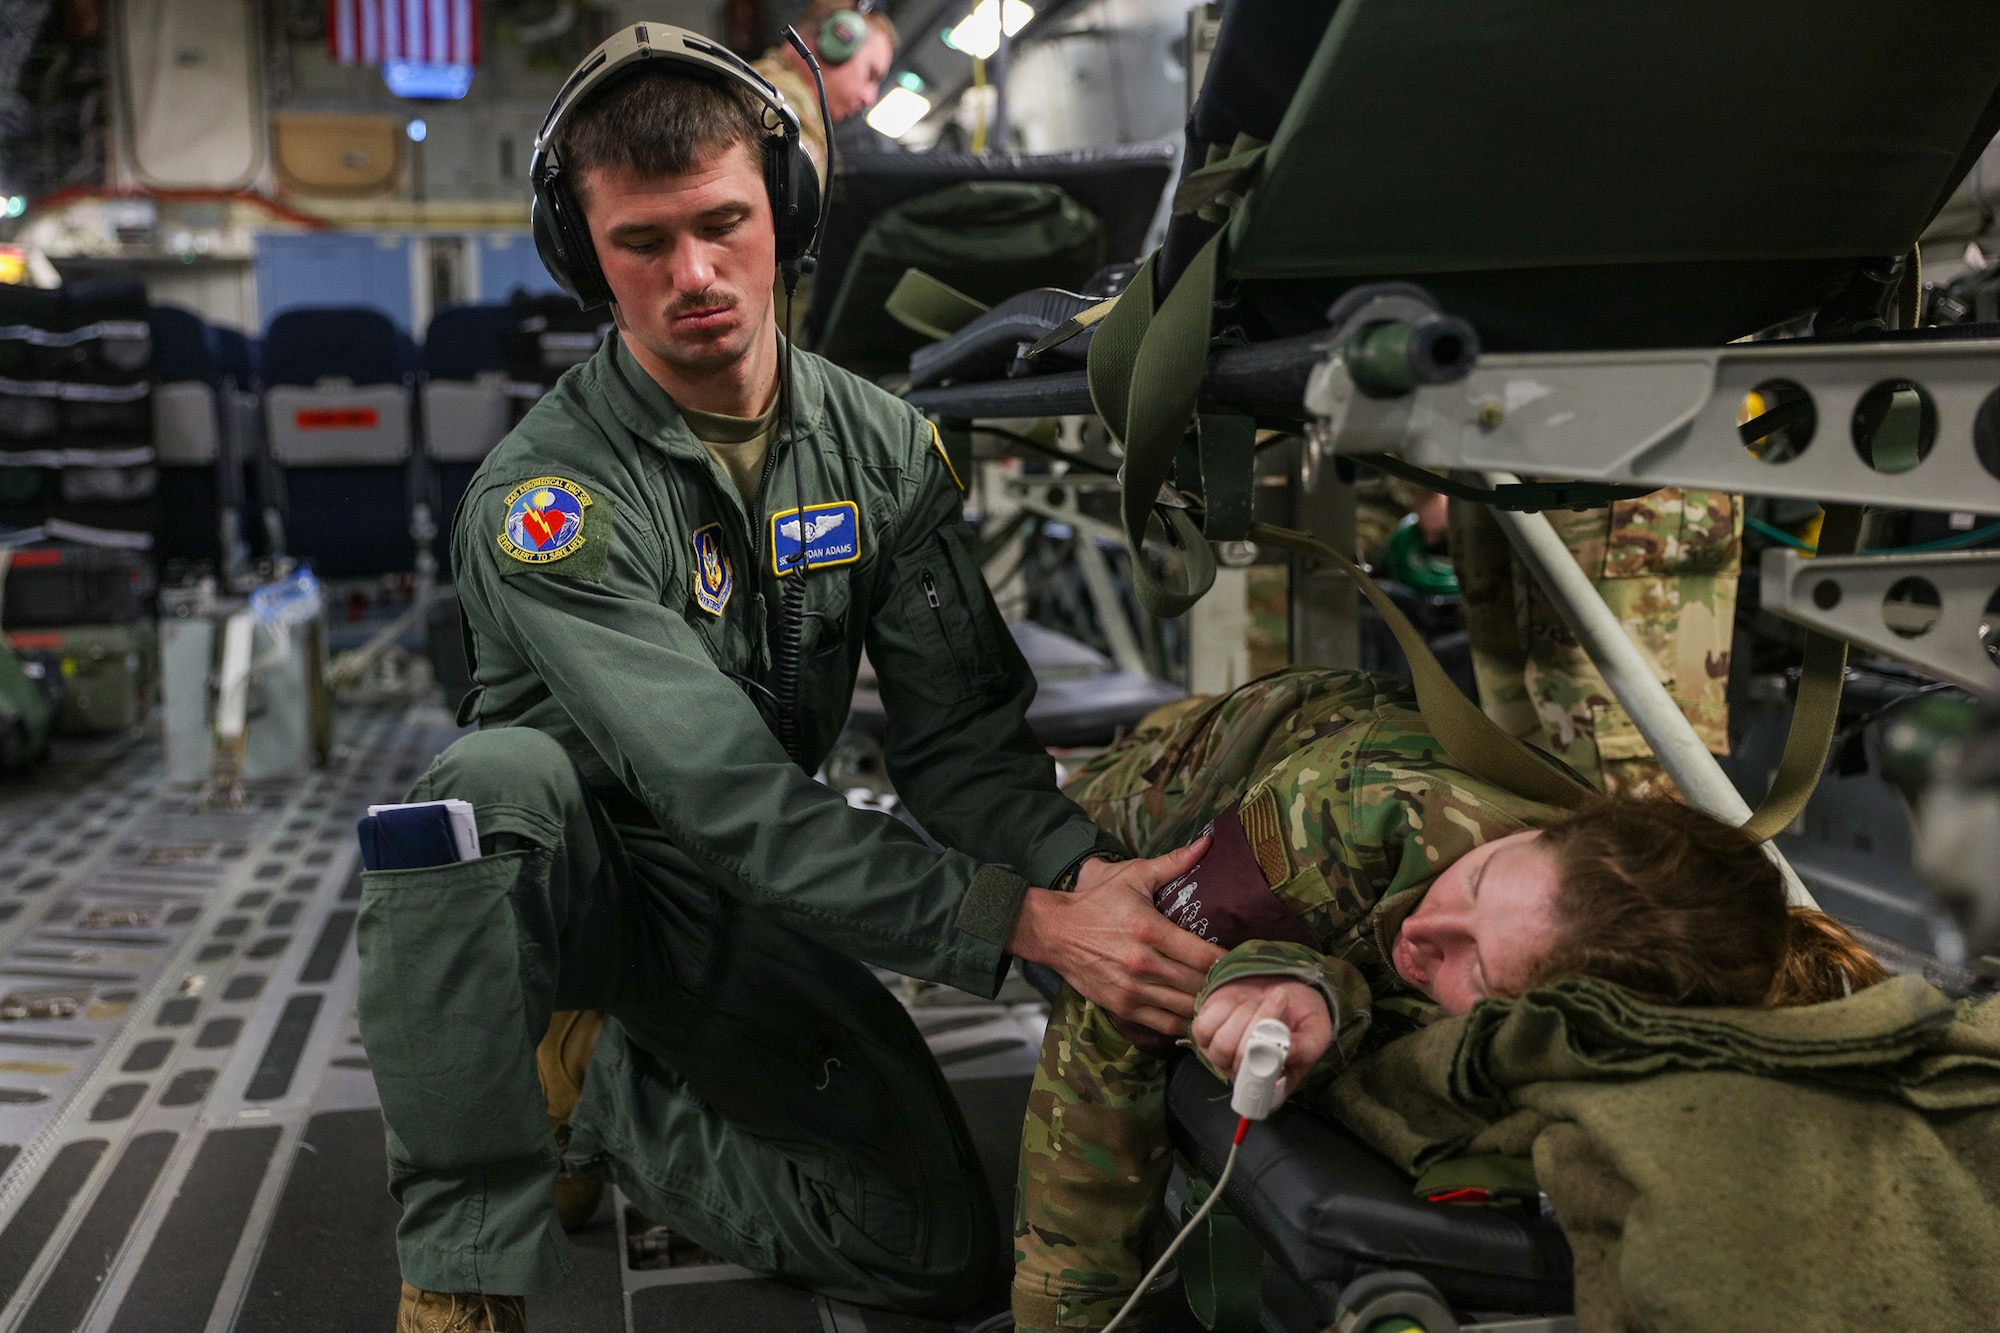 Senior Airman Brandan Adams, 445th Aeromedical Evacuation Squadron AE medical technician, checks the vitals on a “patient” played by Lt. Col. Jessica Brantner, 445th AES flight nurse, during a medical training scenario onboard a C-17 Globemaster III Jan. 20, 2023. The AE flight was part of the 445th Airlift Wing training event held in San Diego, California, Jan. 18-23. Over 150 Reservists from the 445th Airlift Wing, to include 445th Aeromedical Evacuation Squadron, 445th Aerospace Medicine Squadron, 445th Operations Support Squadron, 445th Maintenance Group, 445th Aircraft Maintenance Squadron, 445th Maintenance Squadron, 87th Aerial Port Squadron and 89th Airlift Wing provided support or participated in the training event that included water survival, AES training flights and urban survival, evasion, resistance and escape.